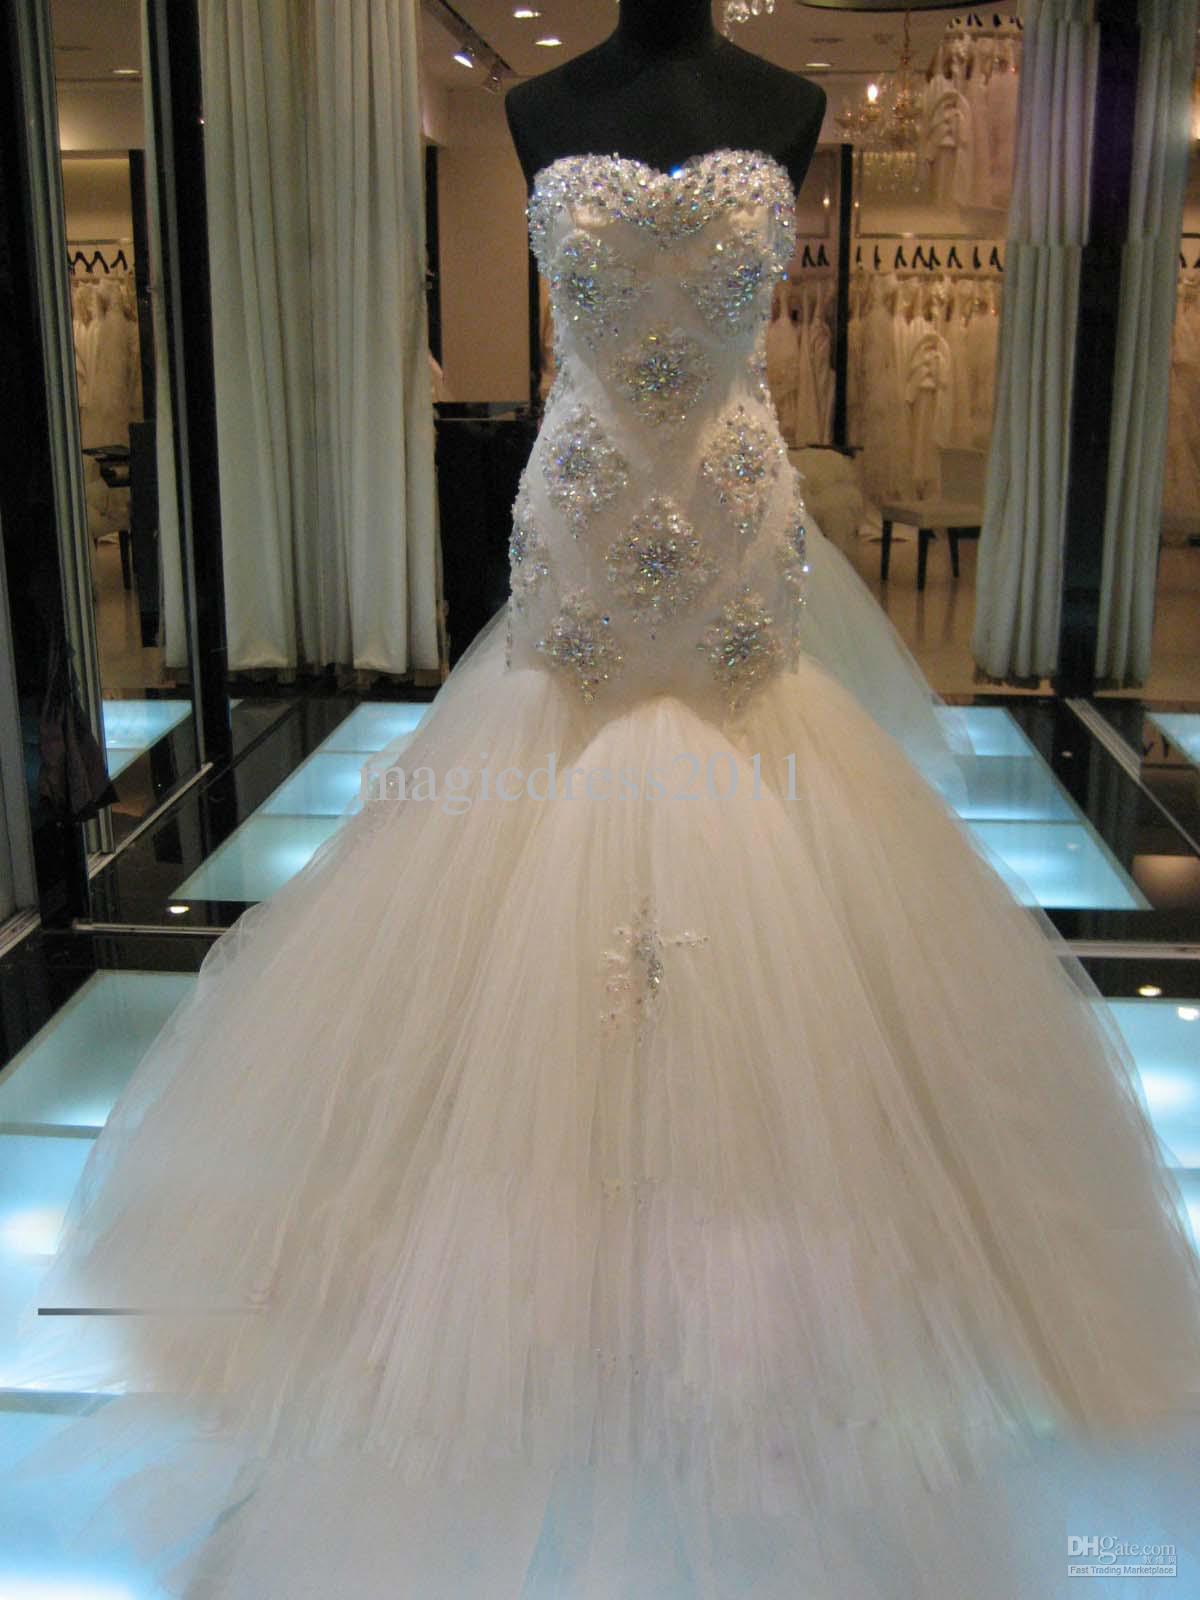 Gorgeous Strapless Mermaid Wedding Dress With Crystals